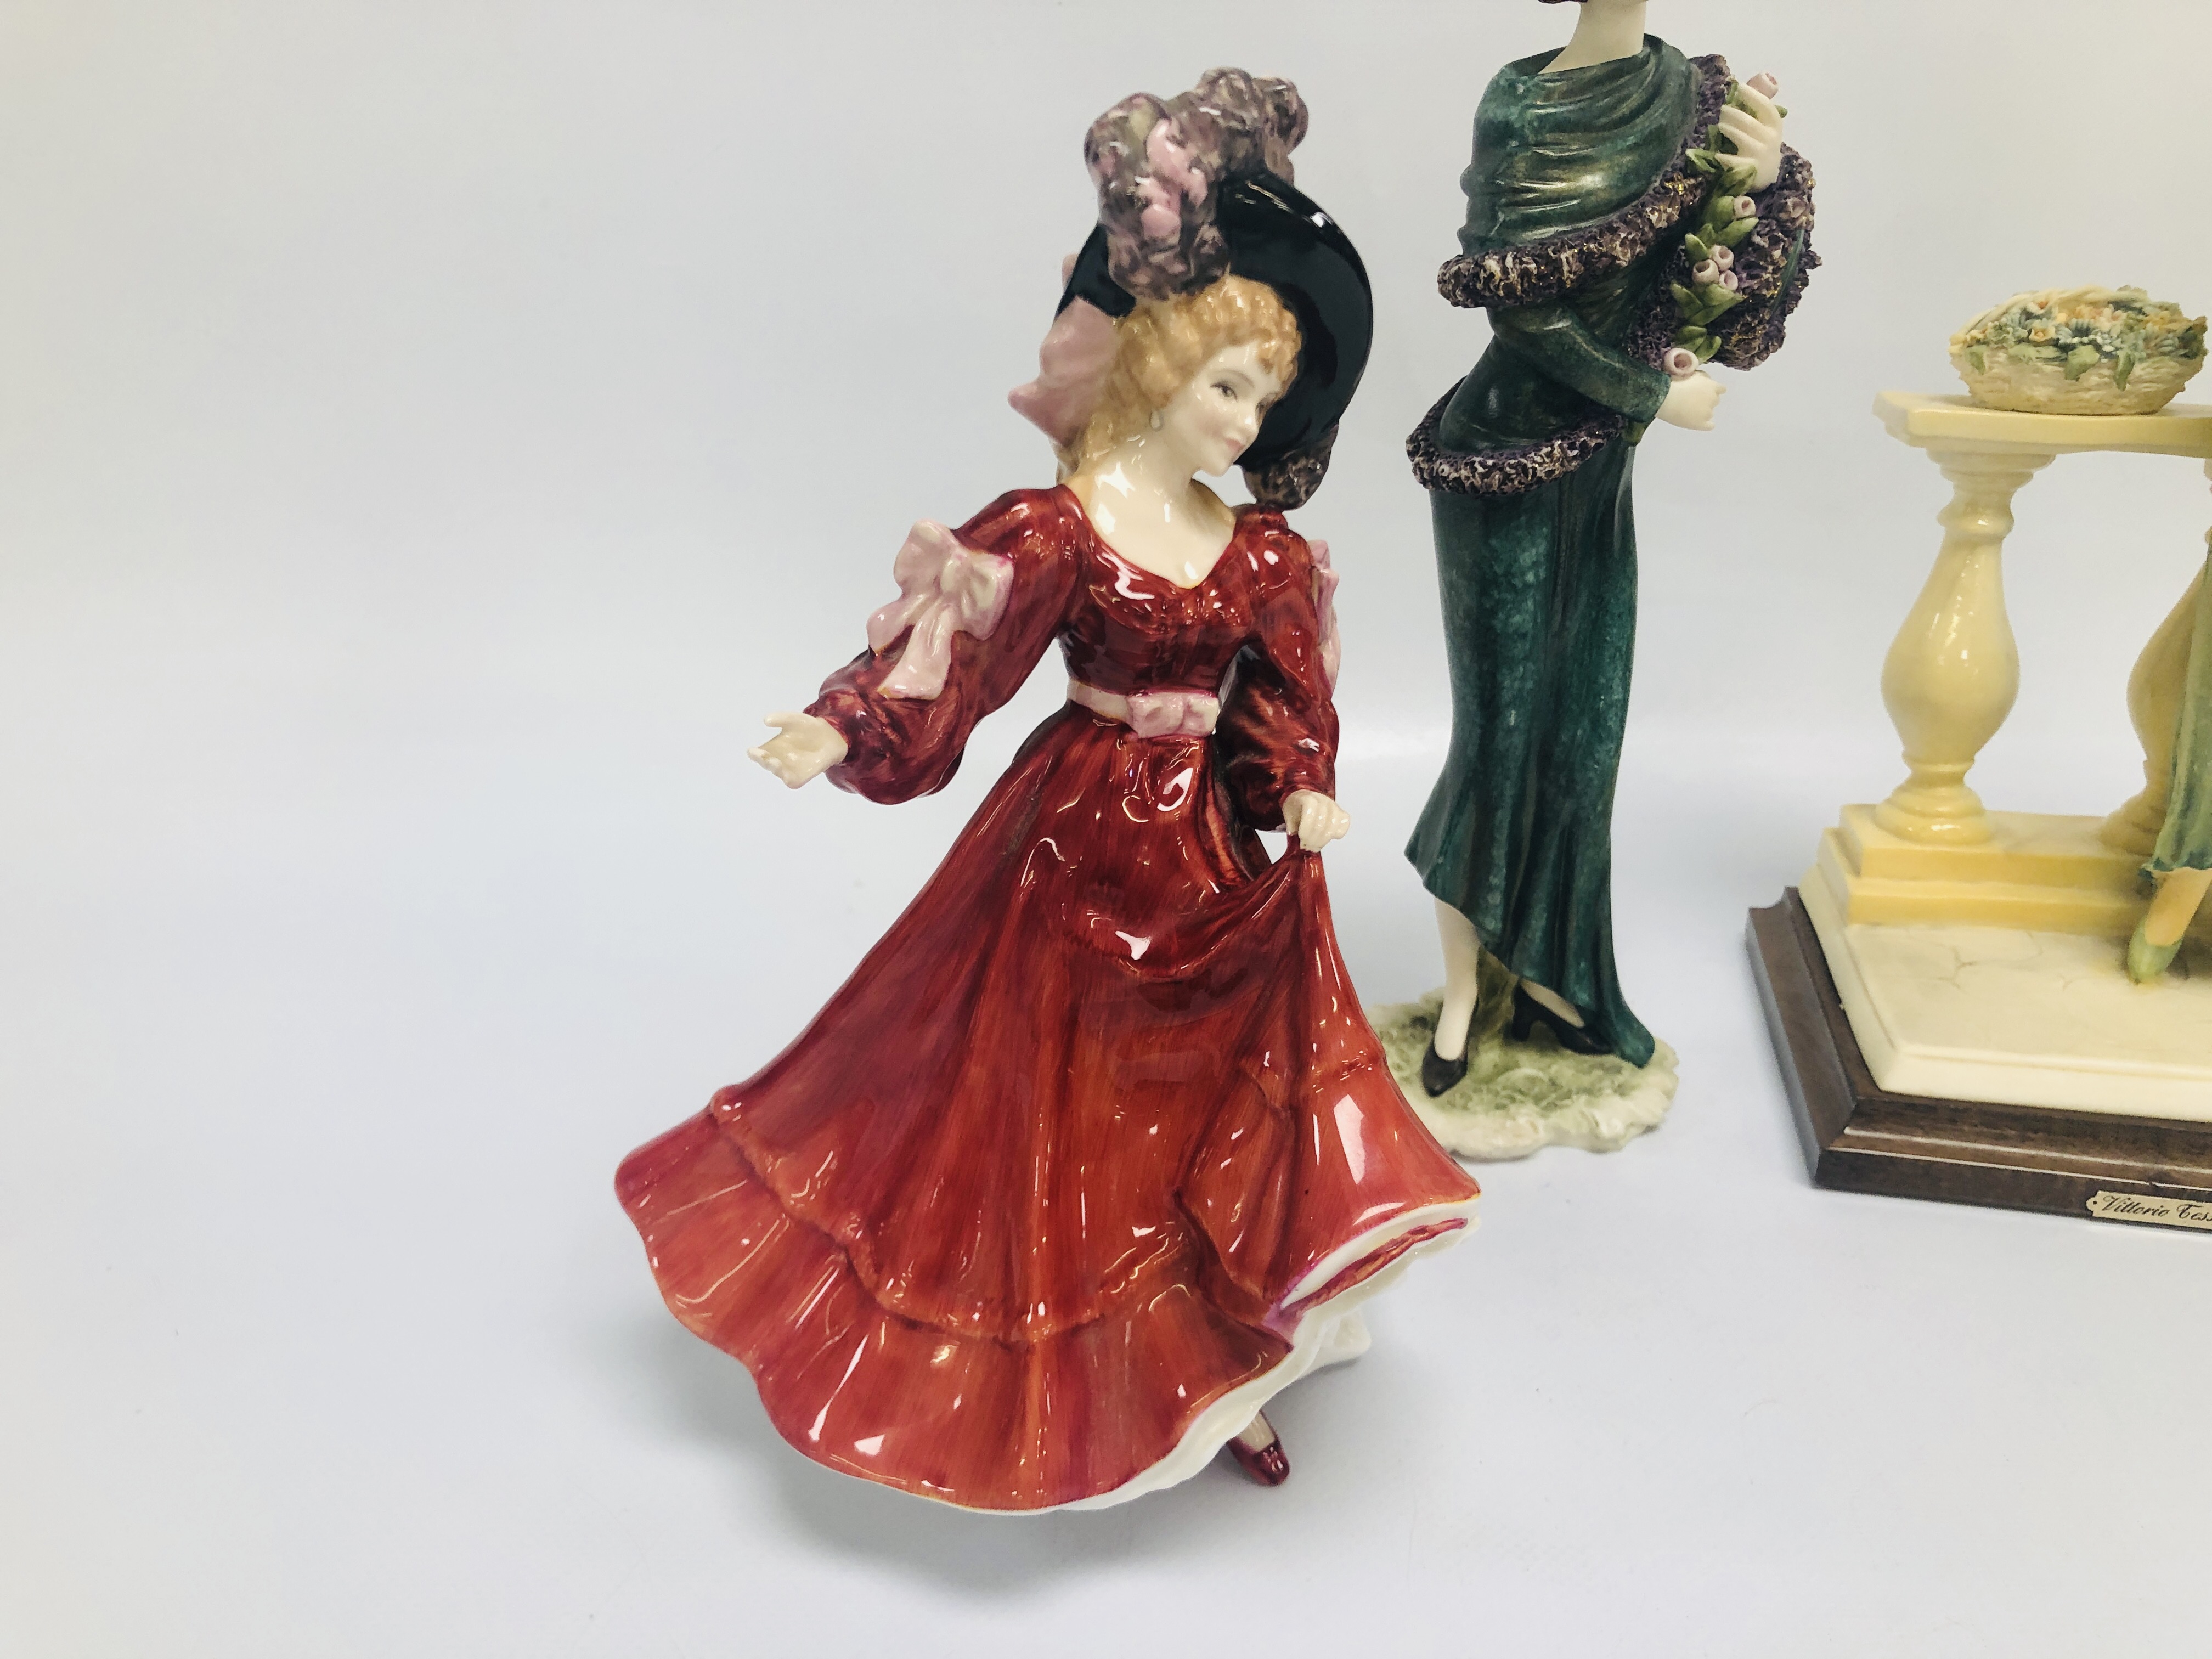 ROYAL DOULTON FIGURINE PATRICIA HN3365 ALONG WITH THREE VARIOUS CABINET ORNAMENTS A.D.L. - Image 2 of 9